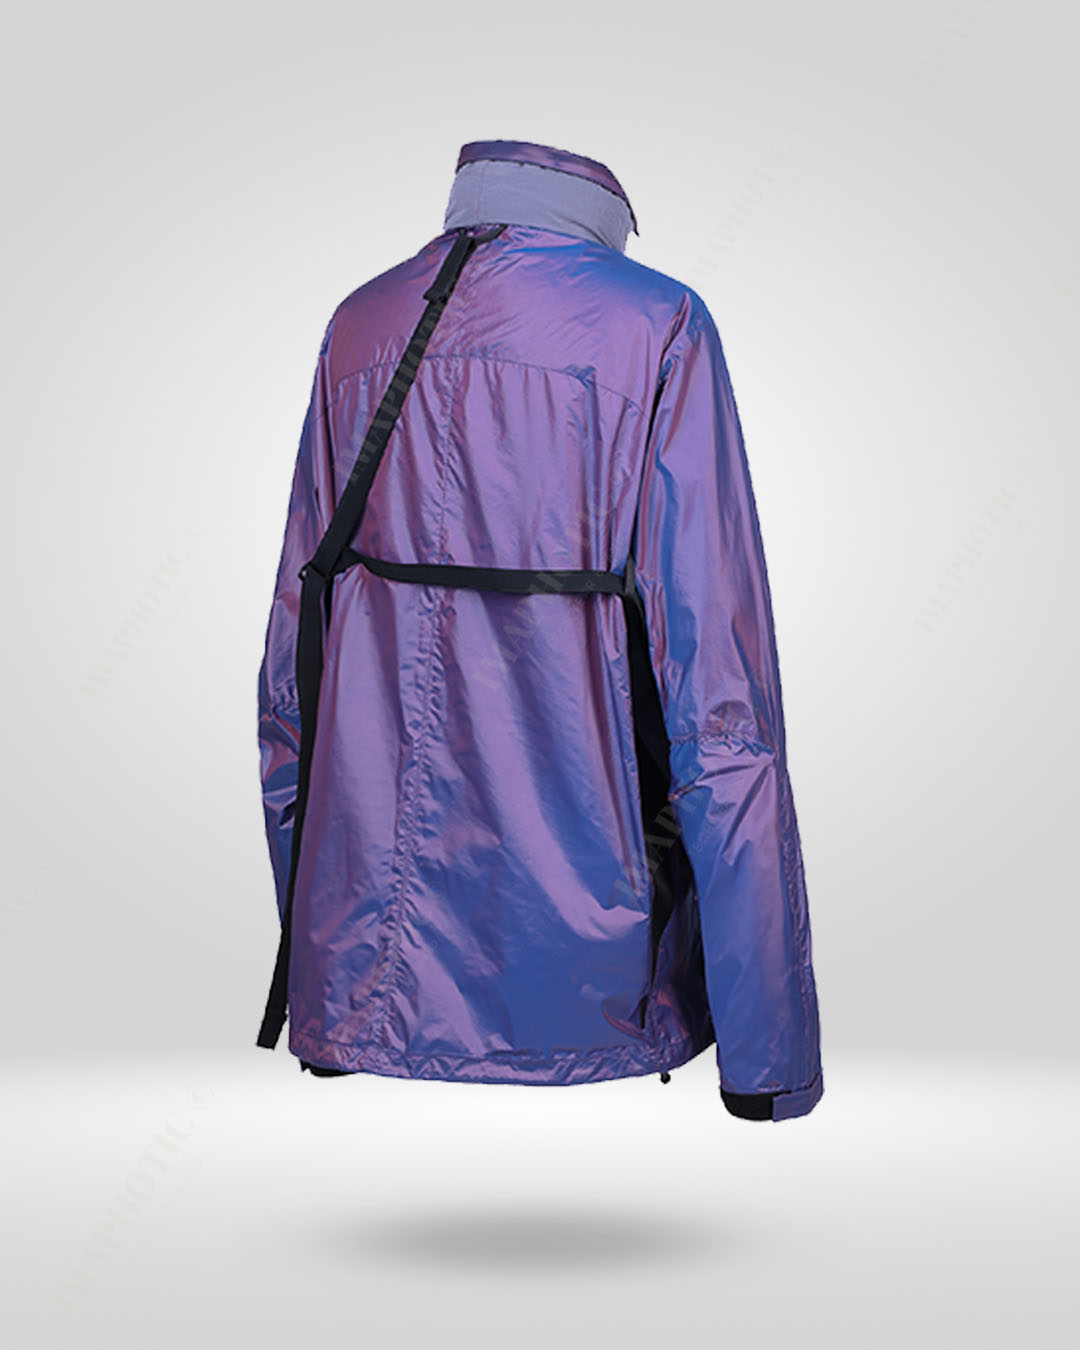 Adaptive Hooded Cyclist Jacket - Conquer Every Clime